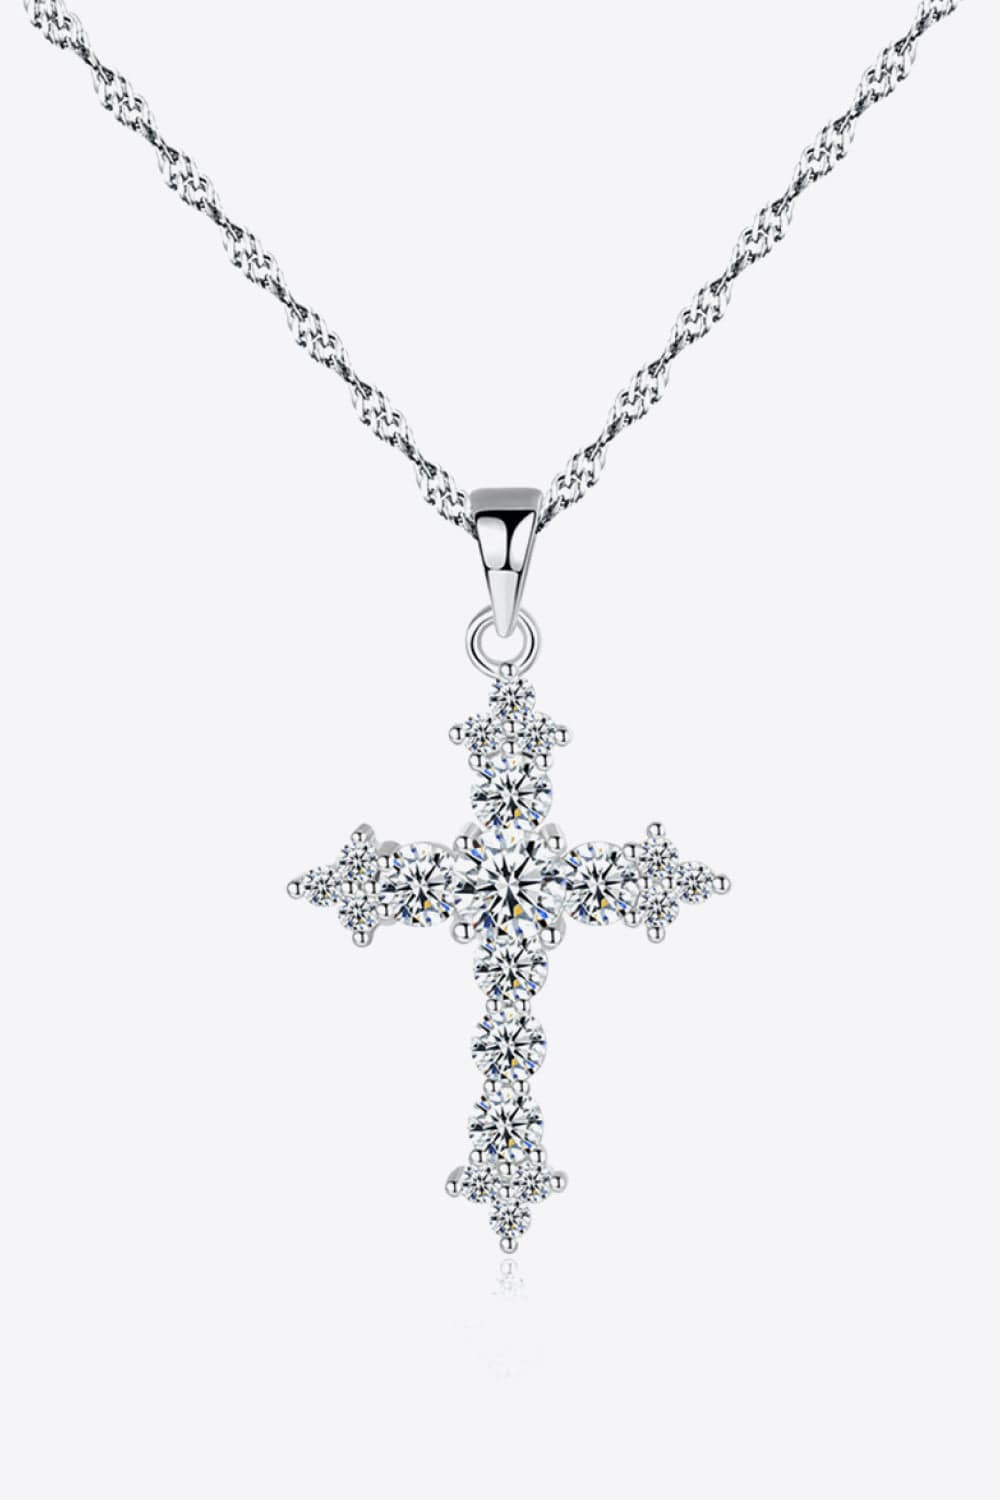 image of the Unique Kulture Zircon Cross Pendant. This elegant pendant features a meticulously crafted 925 Sterling Silver necklace adorned with a stunning Zircon Cross Pendant at its center. The pendant exudes a blend of religious symbolism and contemporary style, making it a versatile accessory for various occasions. The Zircon stones add a touch of sparkle and sophistication to the pendant, catching and reflecting light beautifully. A perfect blend of craftsmanship and elegance, t